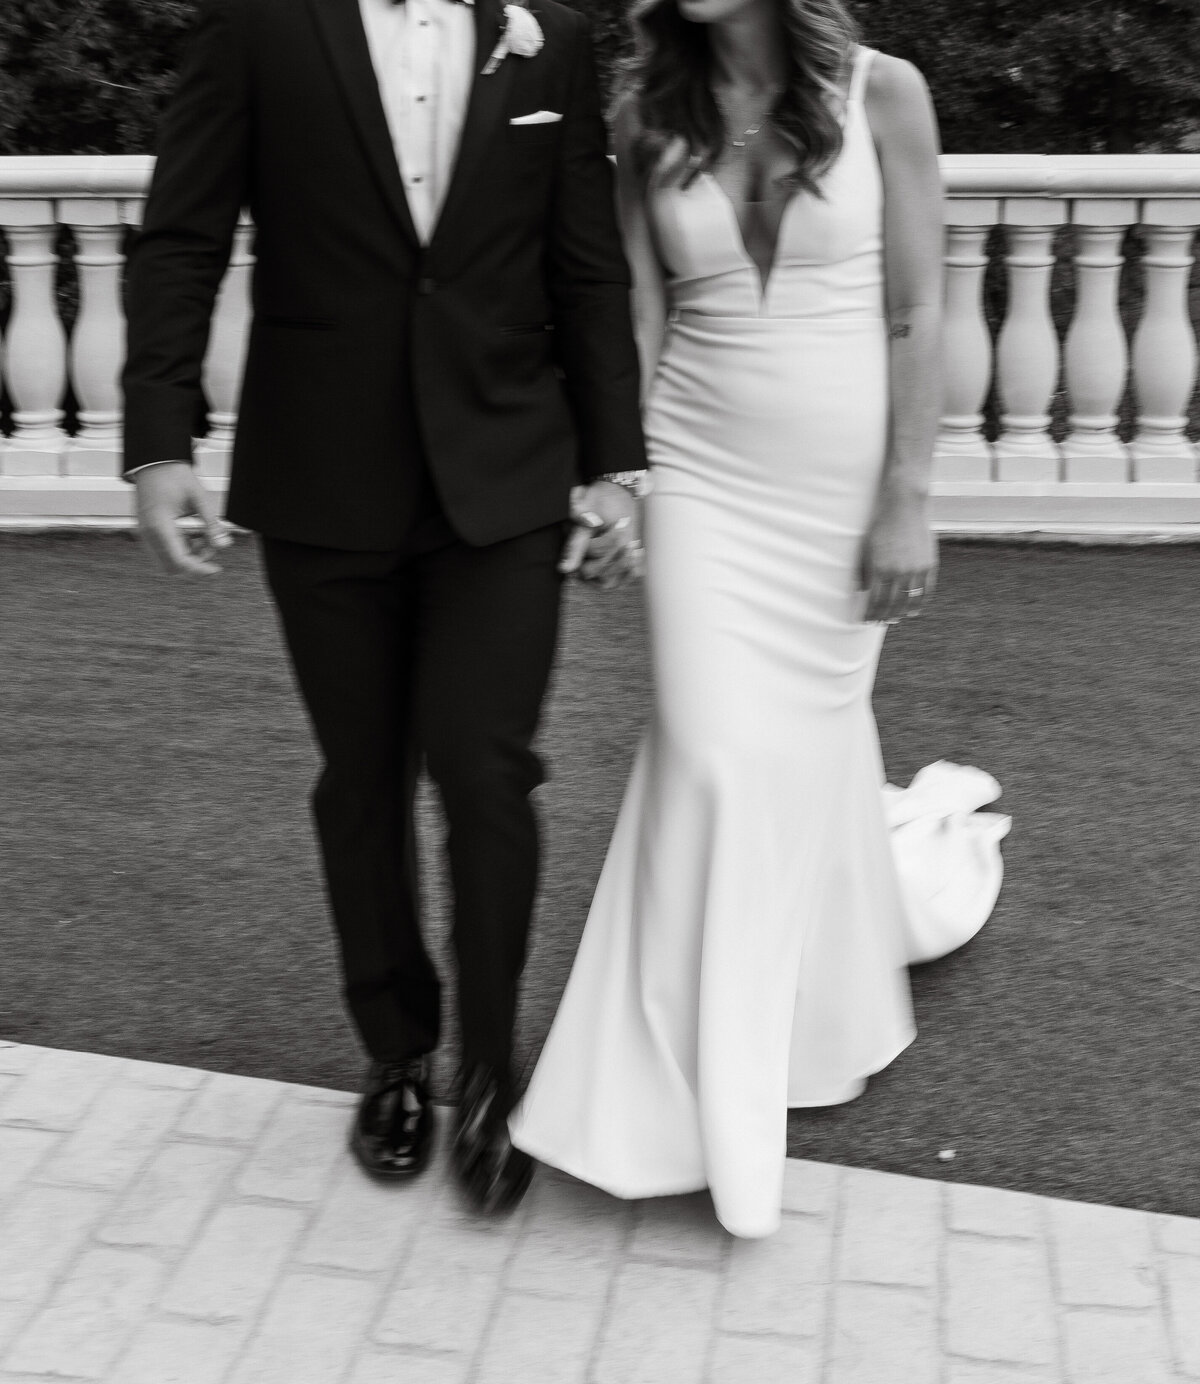 Wedding Photographer & Videographer, black and white image of bride and groom walking together